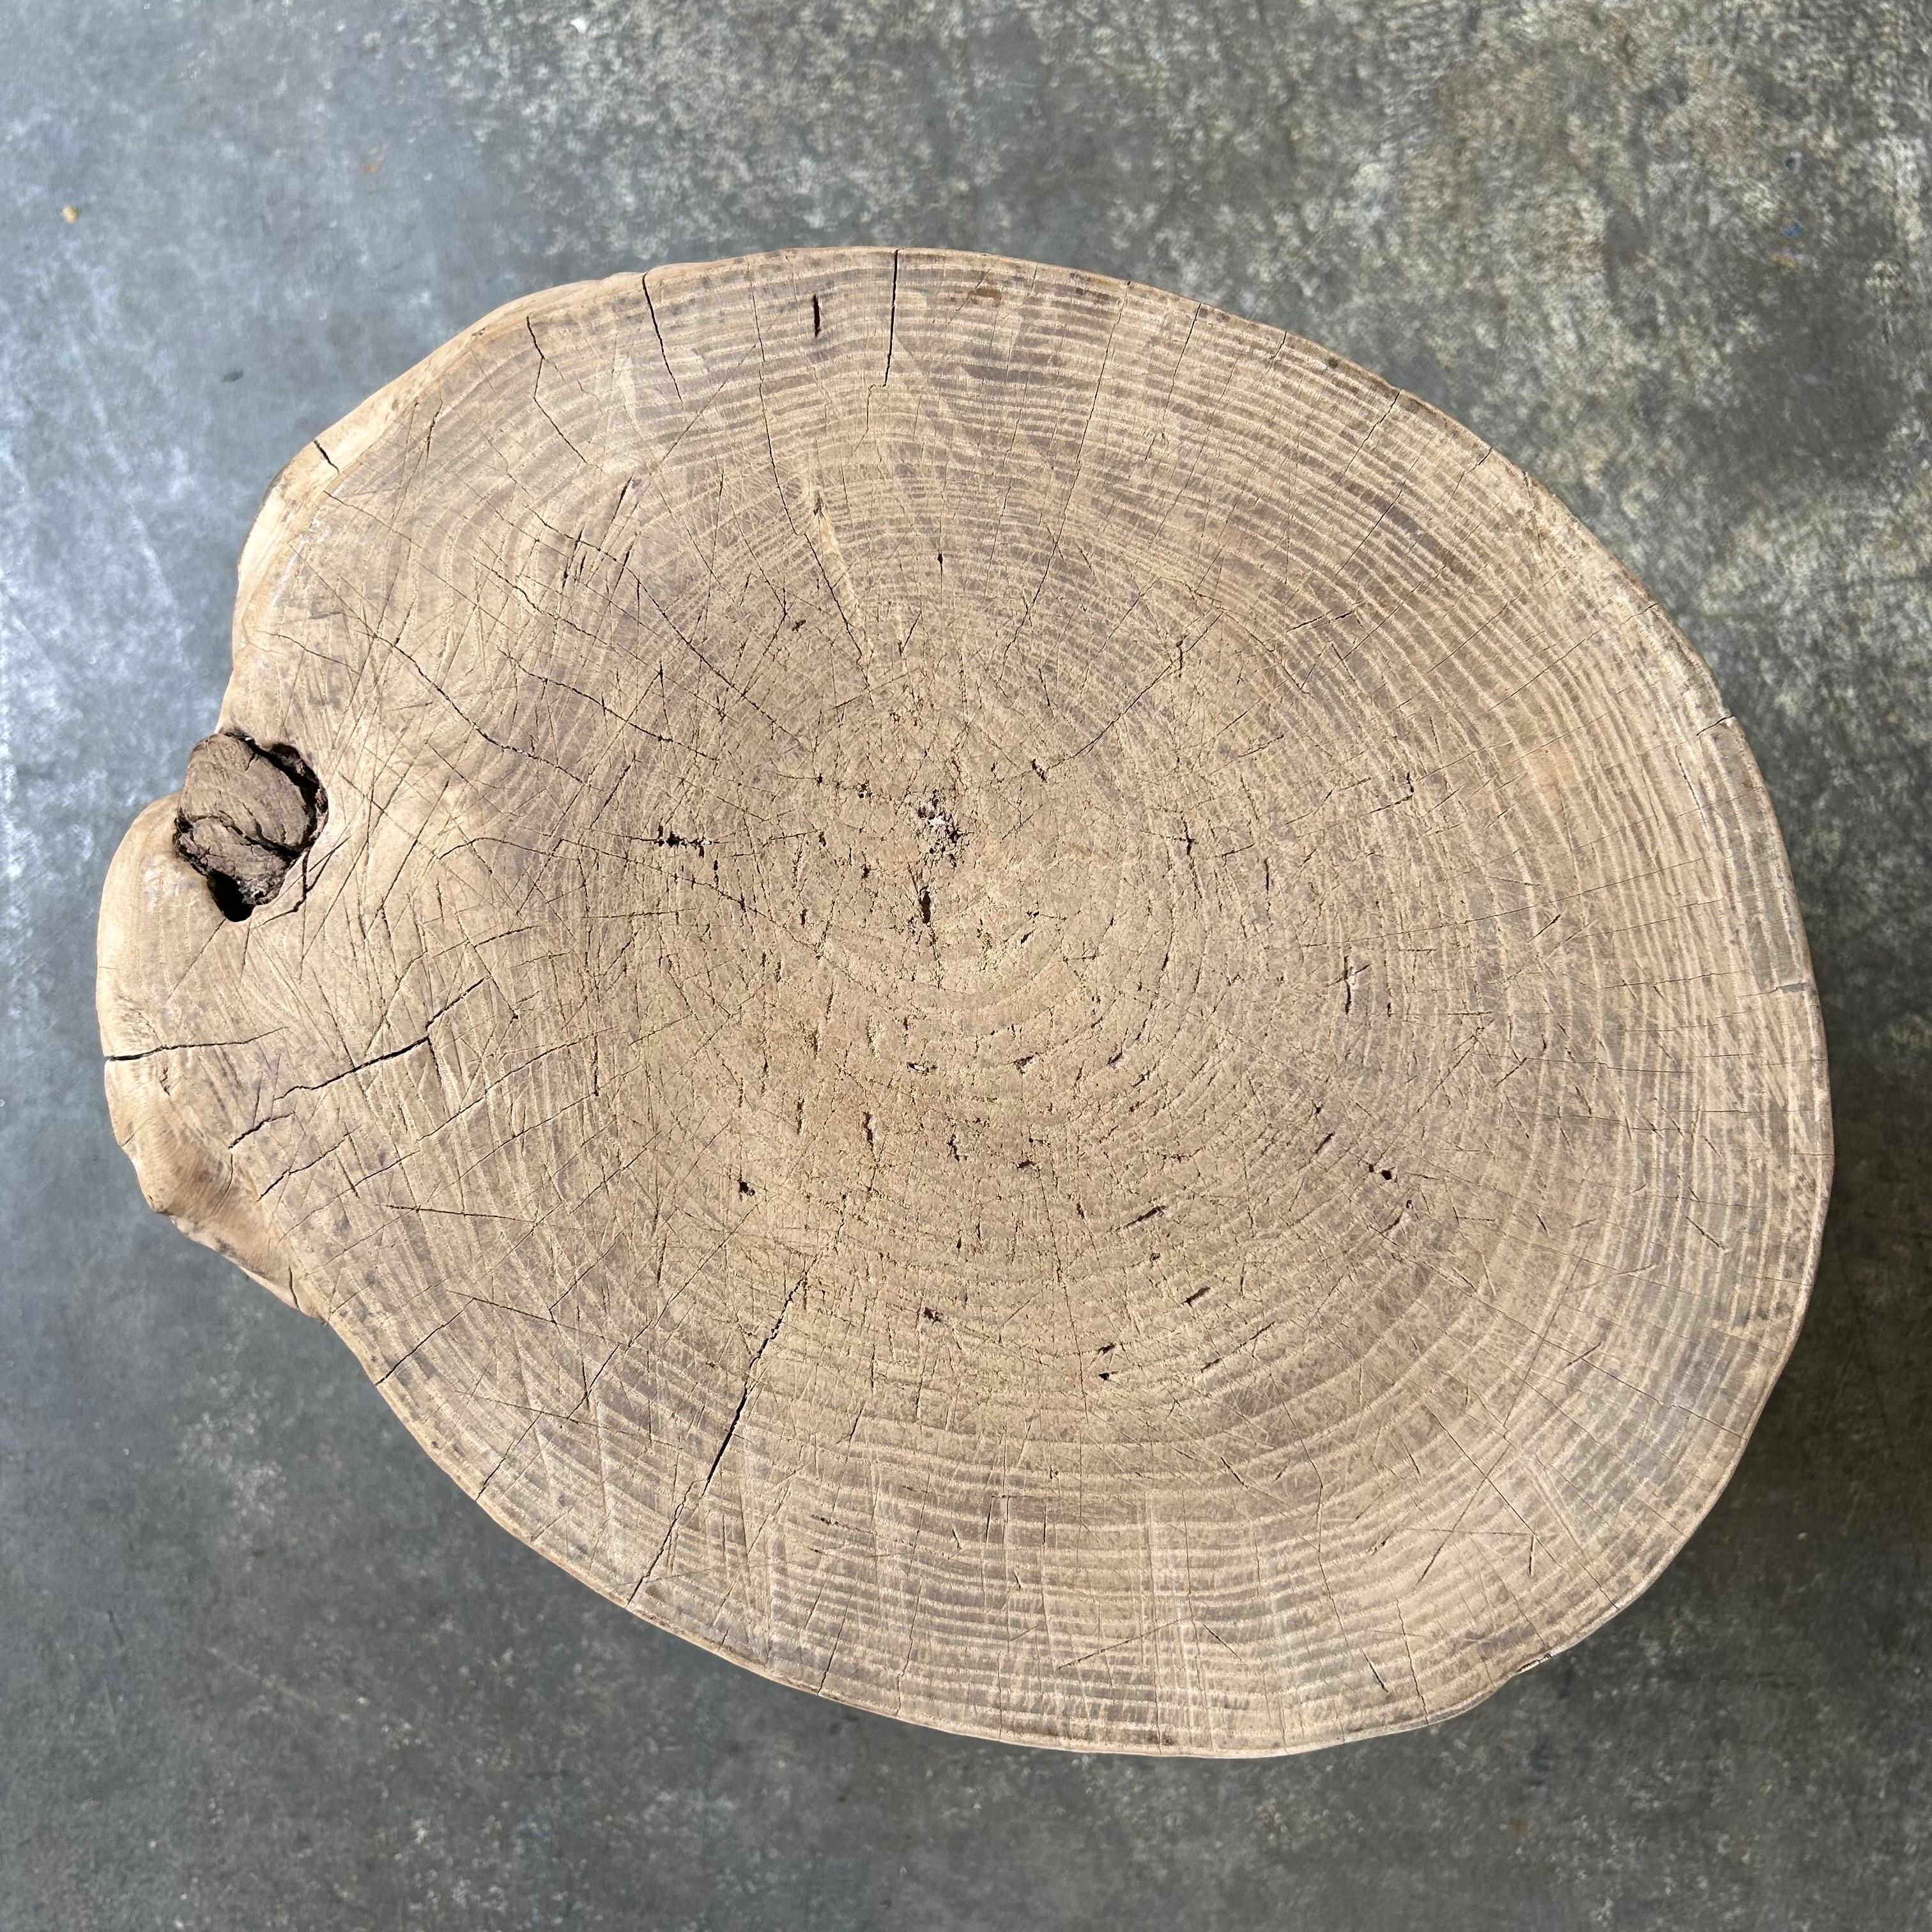 This solid stump slice was turned into a side table or stool. The solid thick top has a beautiful movement with unique characteristics. A natural live edge to show shape and form of what was. Solid and sturdy, perfect earthy organic piece to add to